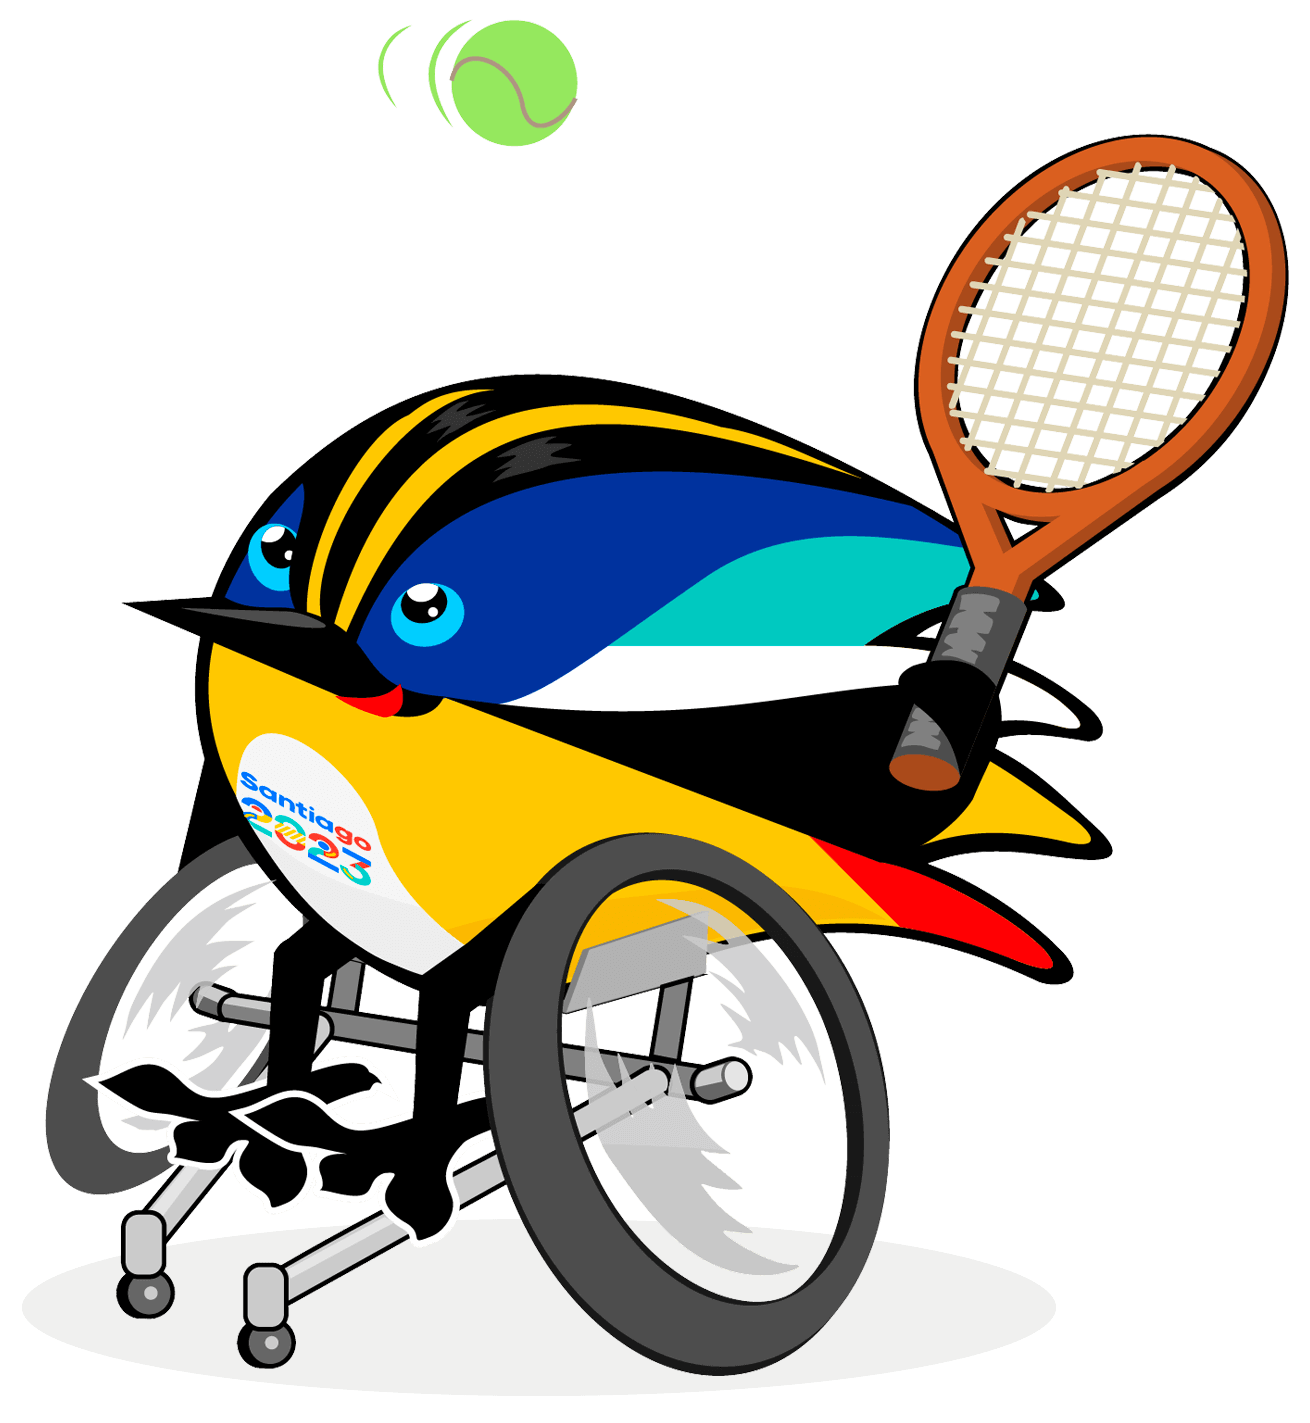 Fiu practices wheelchair tennis, with one of its wings it holds a racket and with the other it moves its chair. Its eyes are locked in a tennis ball and it is very focused to practice this sport. 